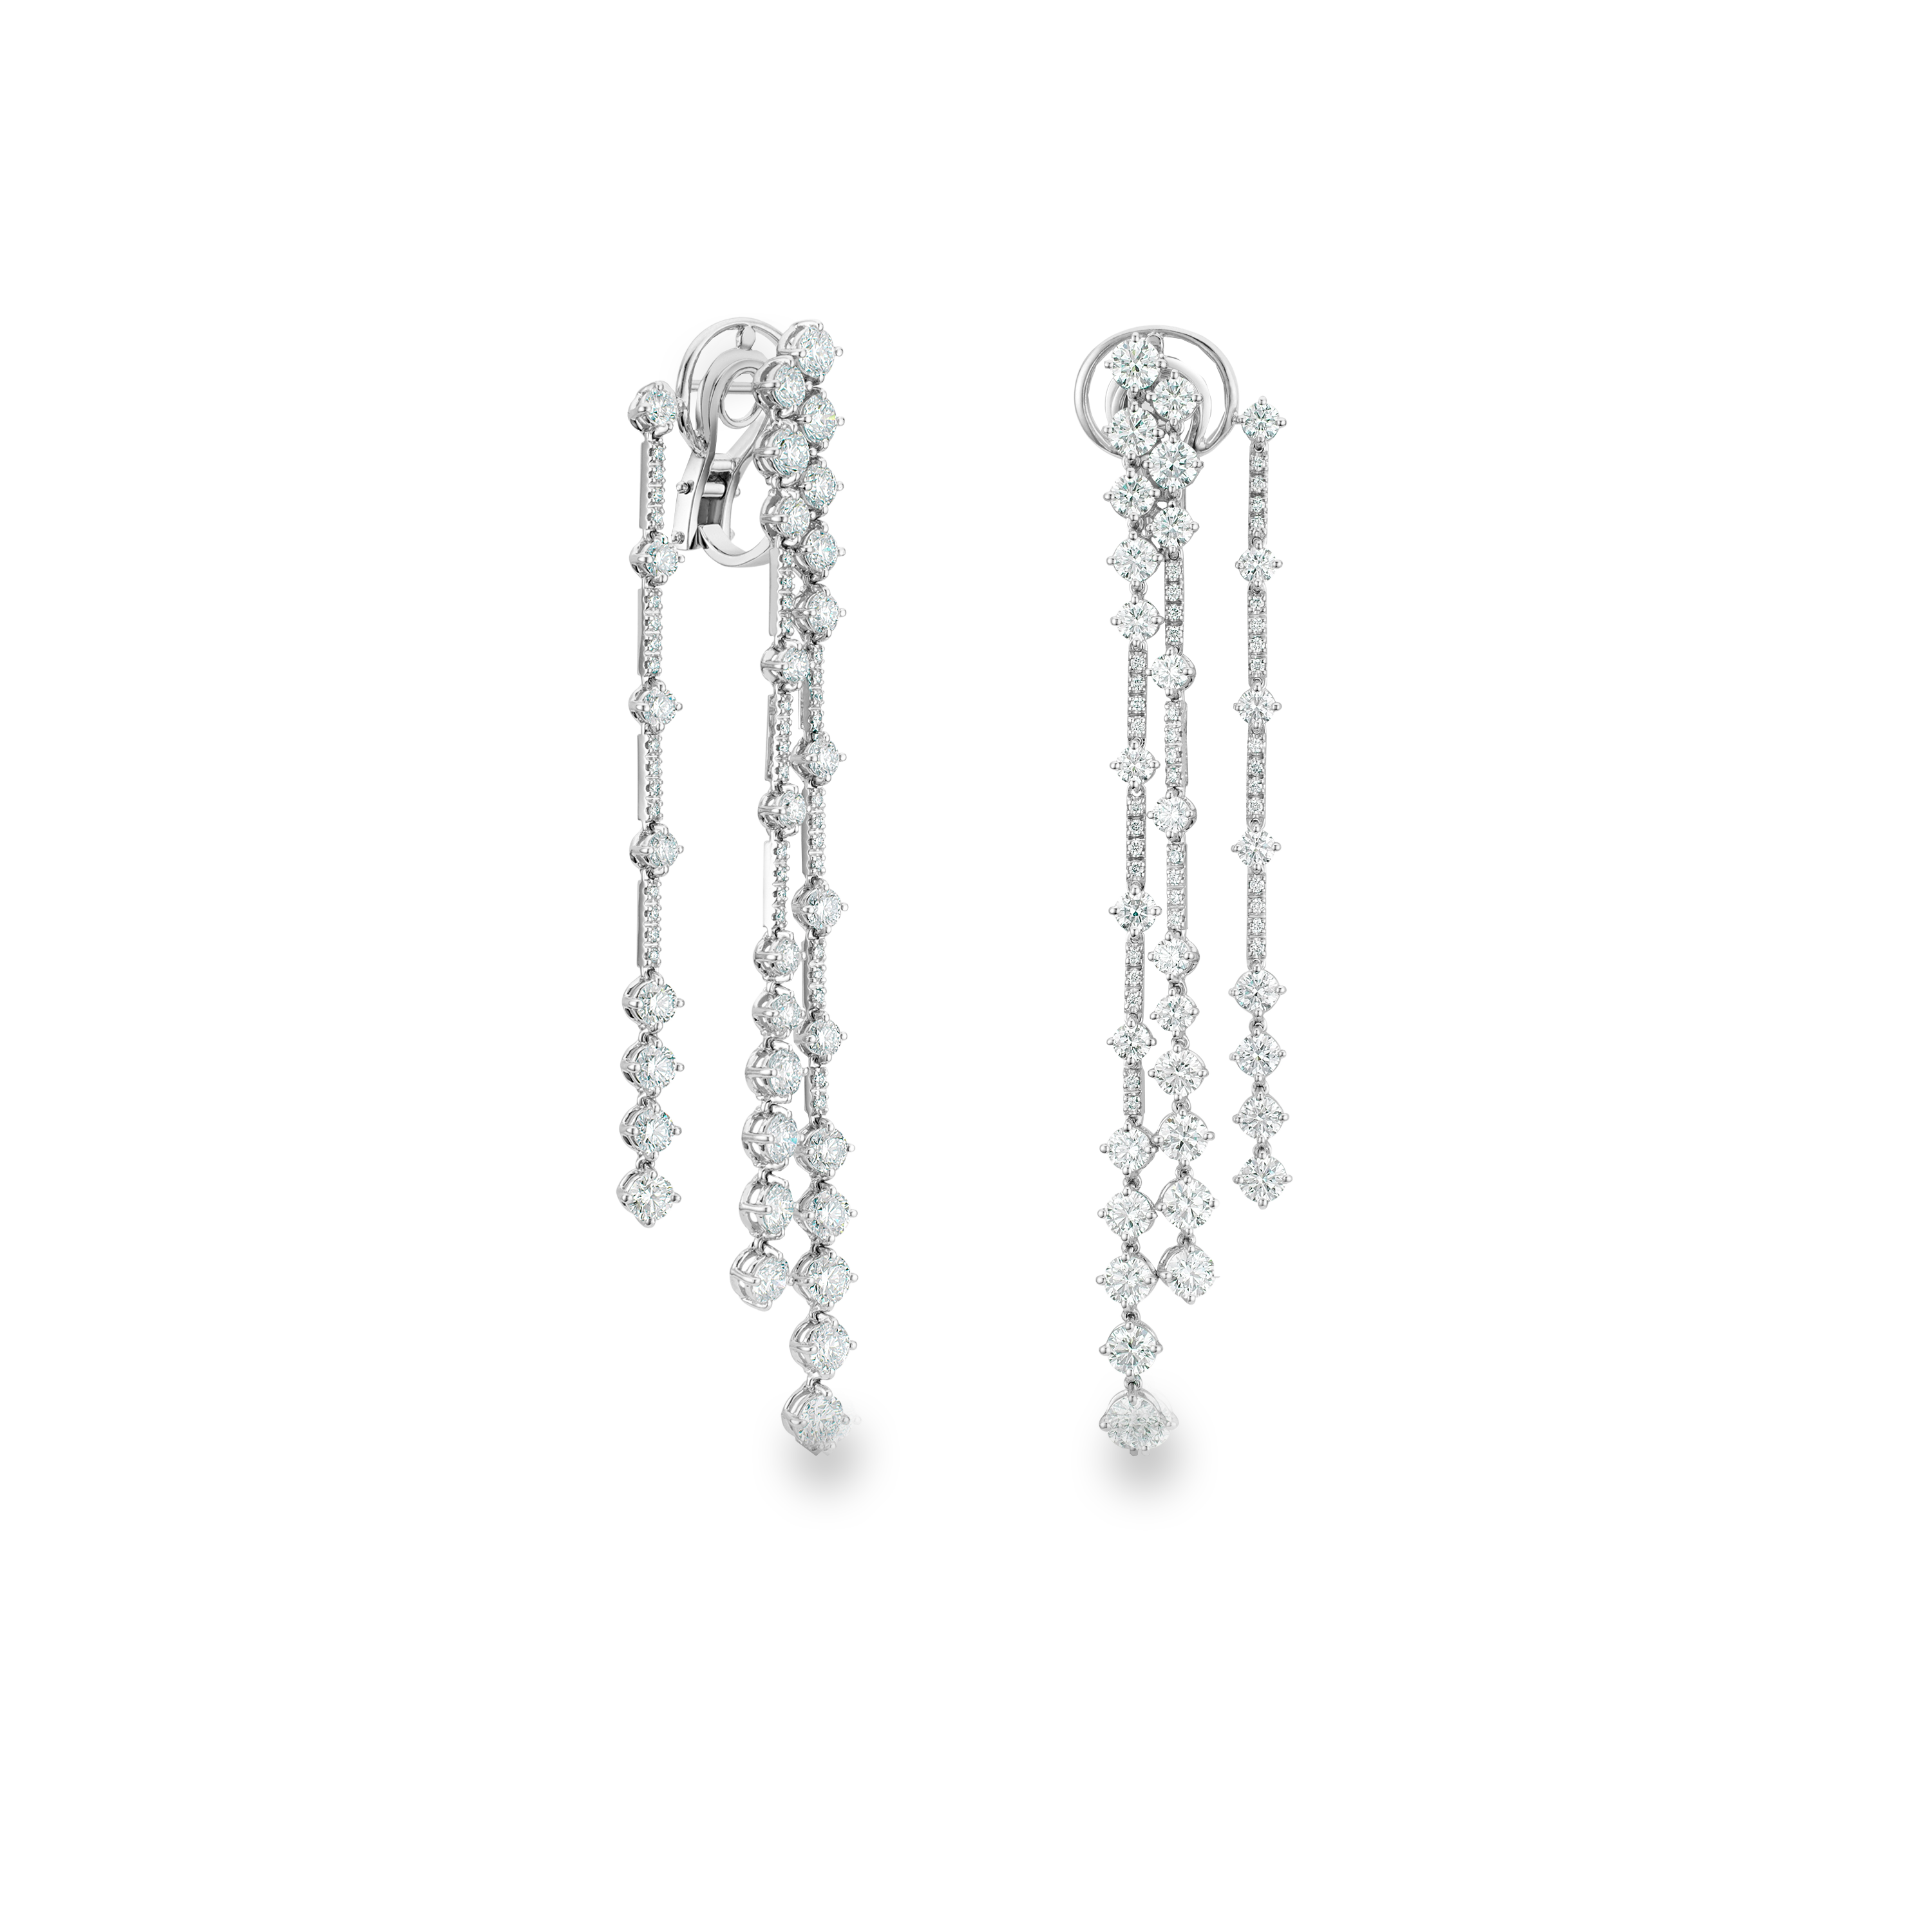 Arpeggia three line earrings in white gold, image 1